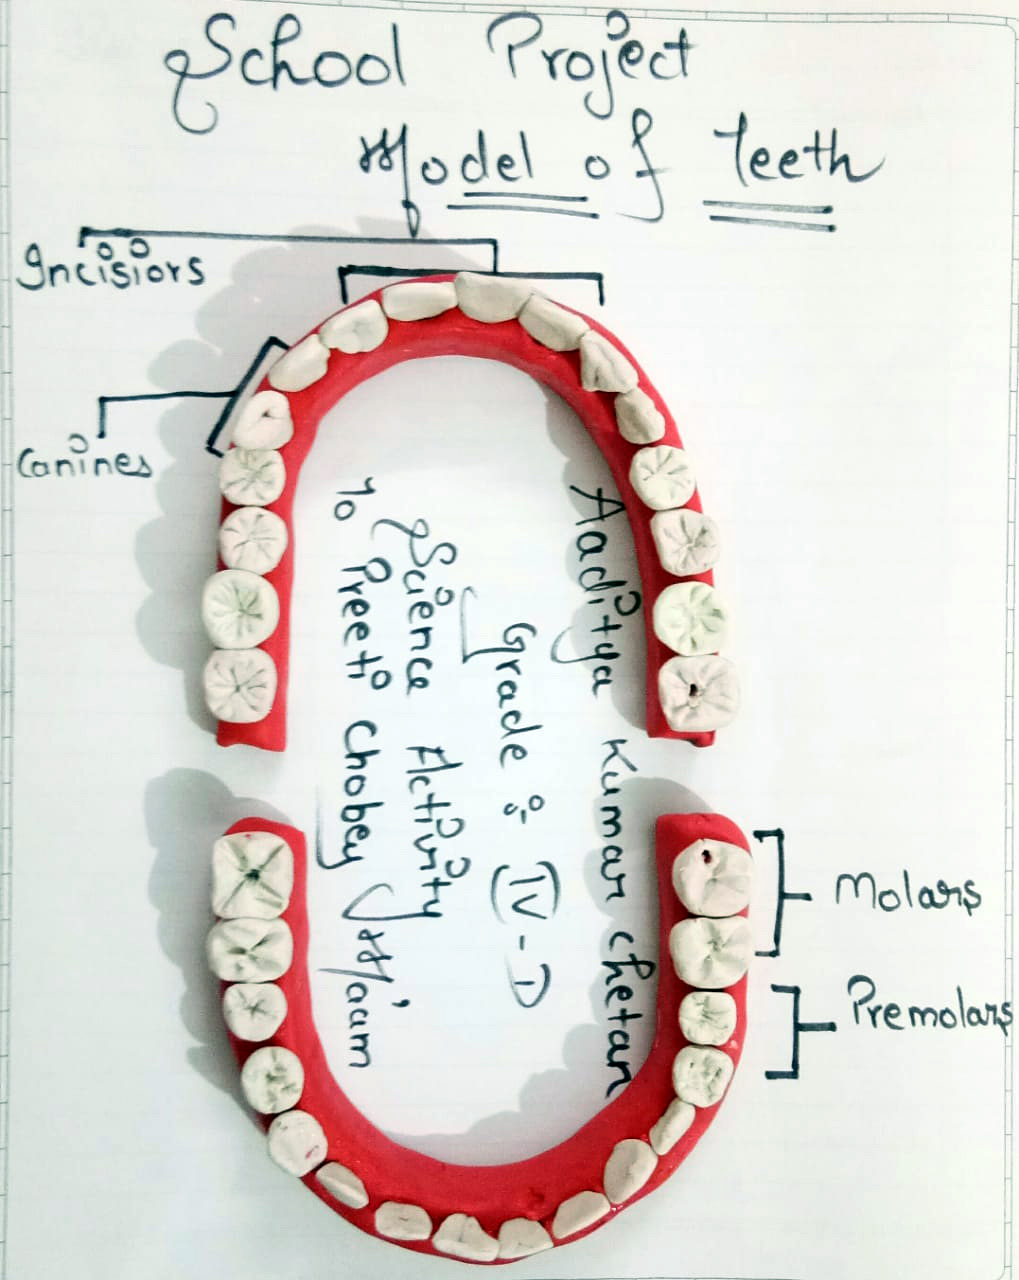 TEETH STRUCTURE